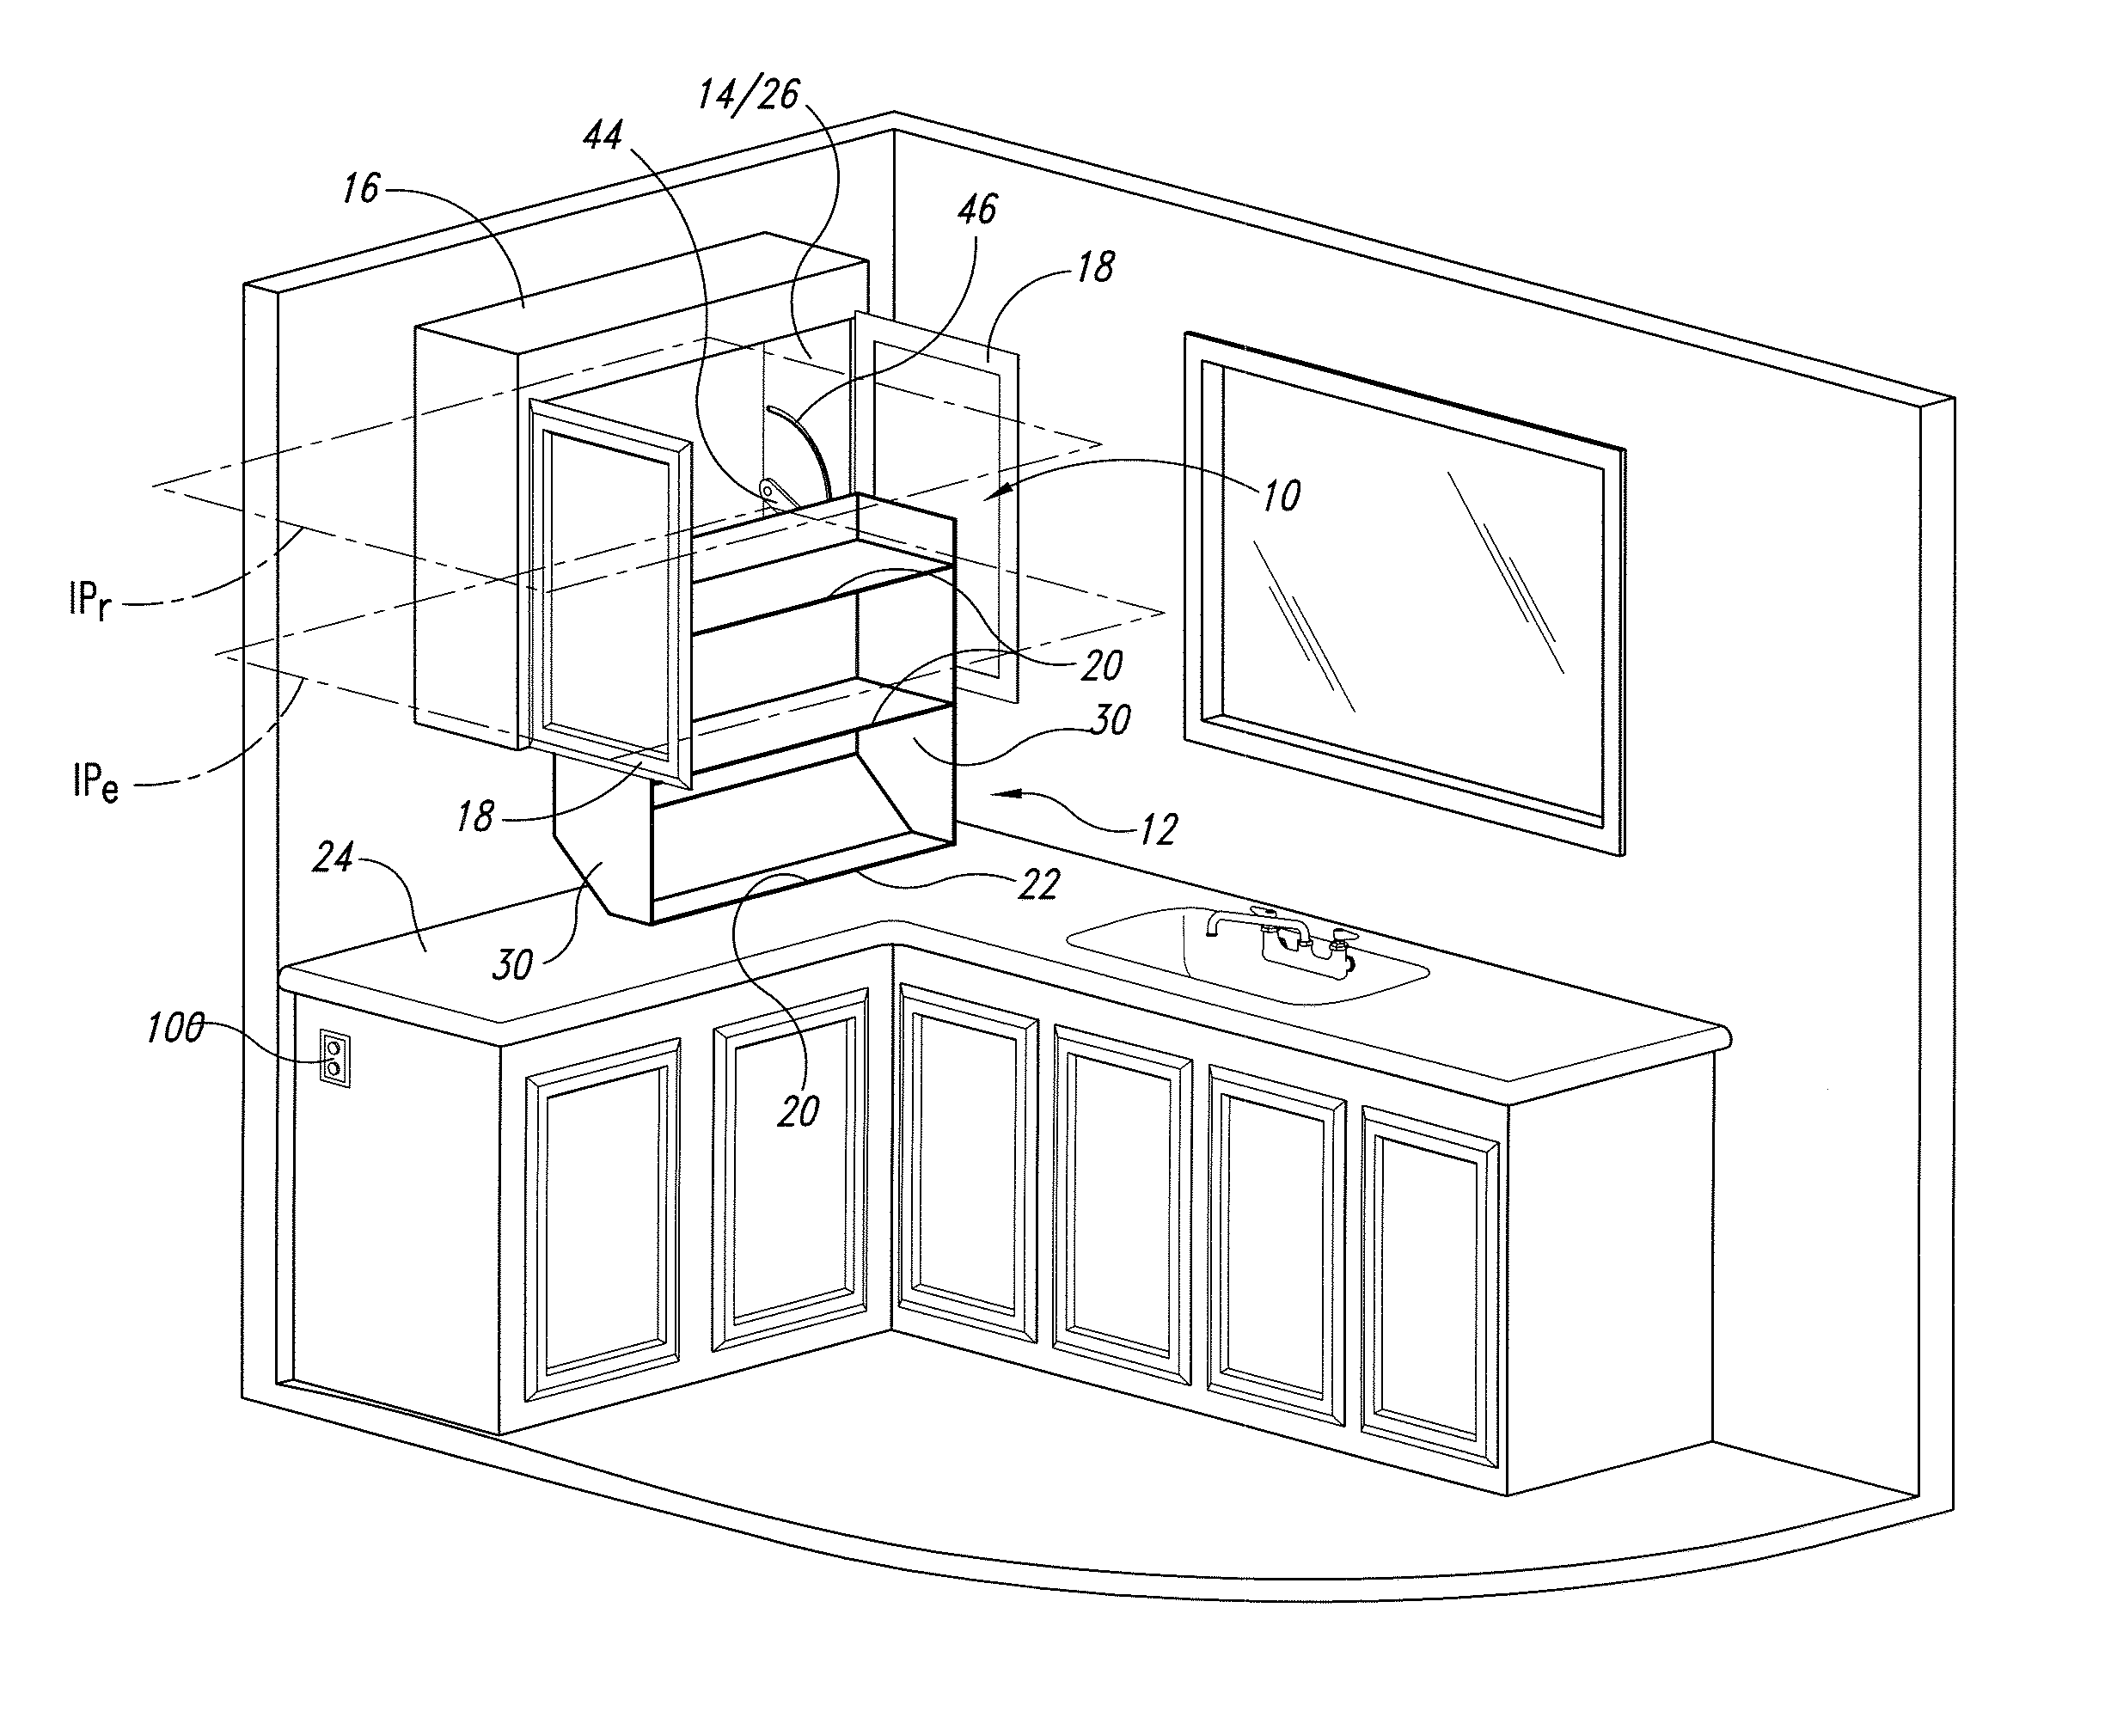 Motorized moveable shelf assembly for cabinet structures